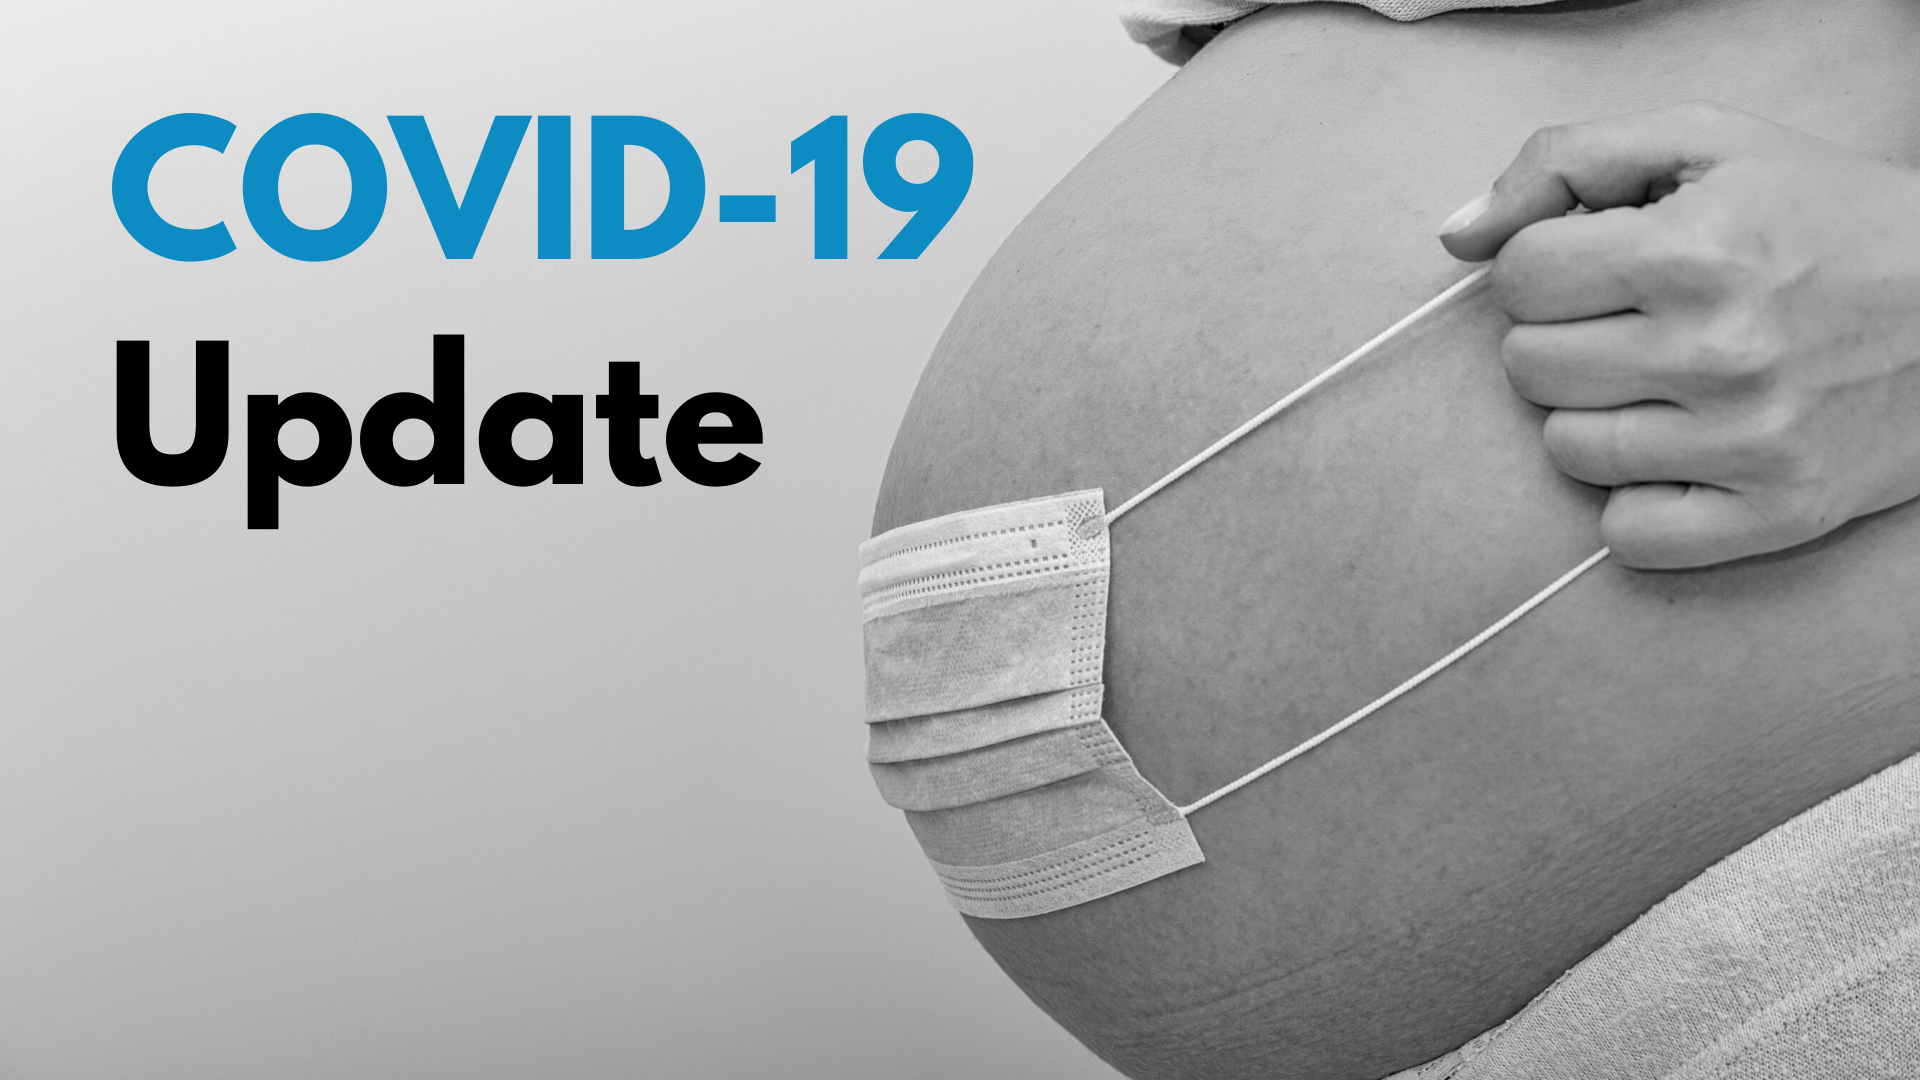 COVID-19 Pregnancy Data in the United States: August 21 Update